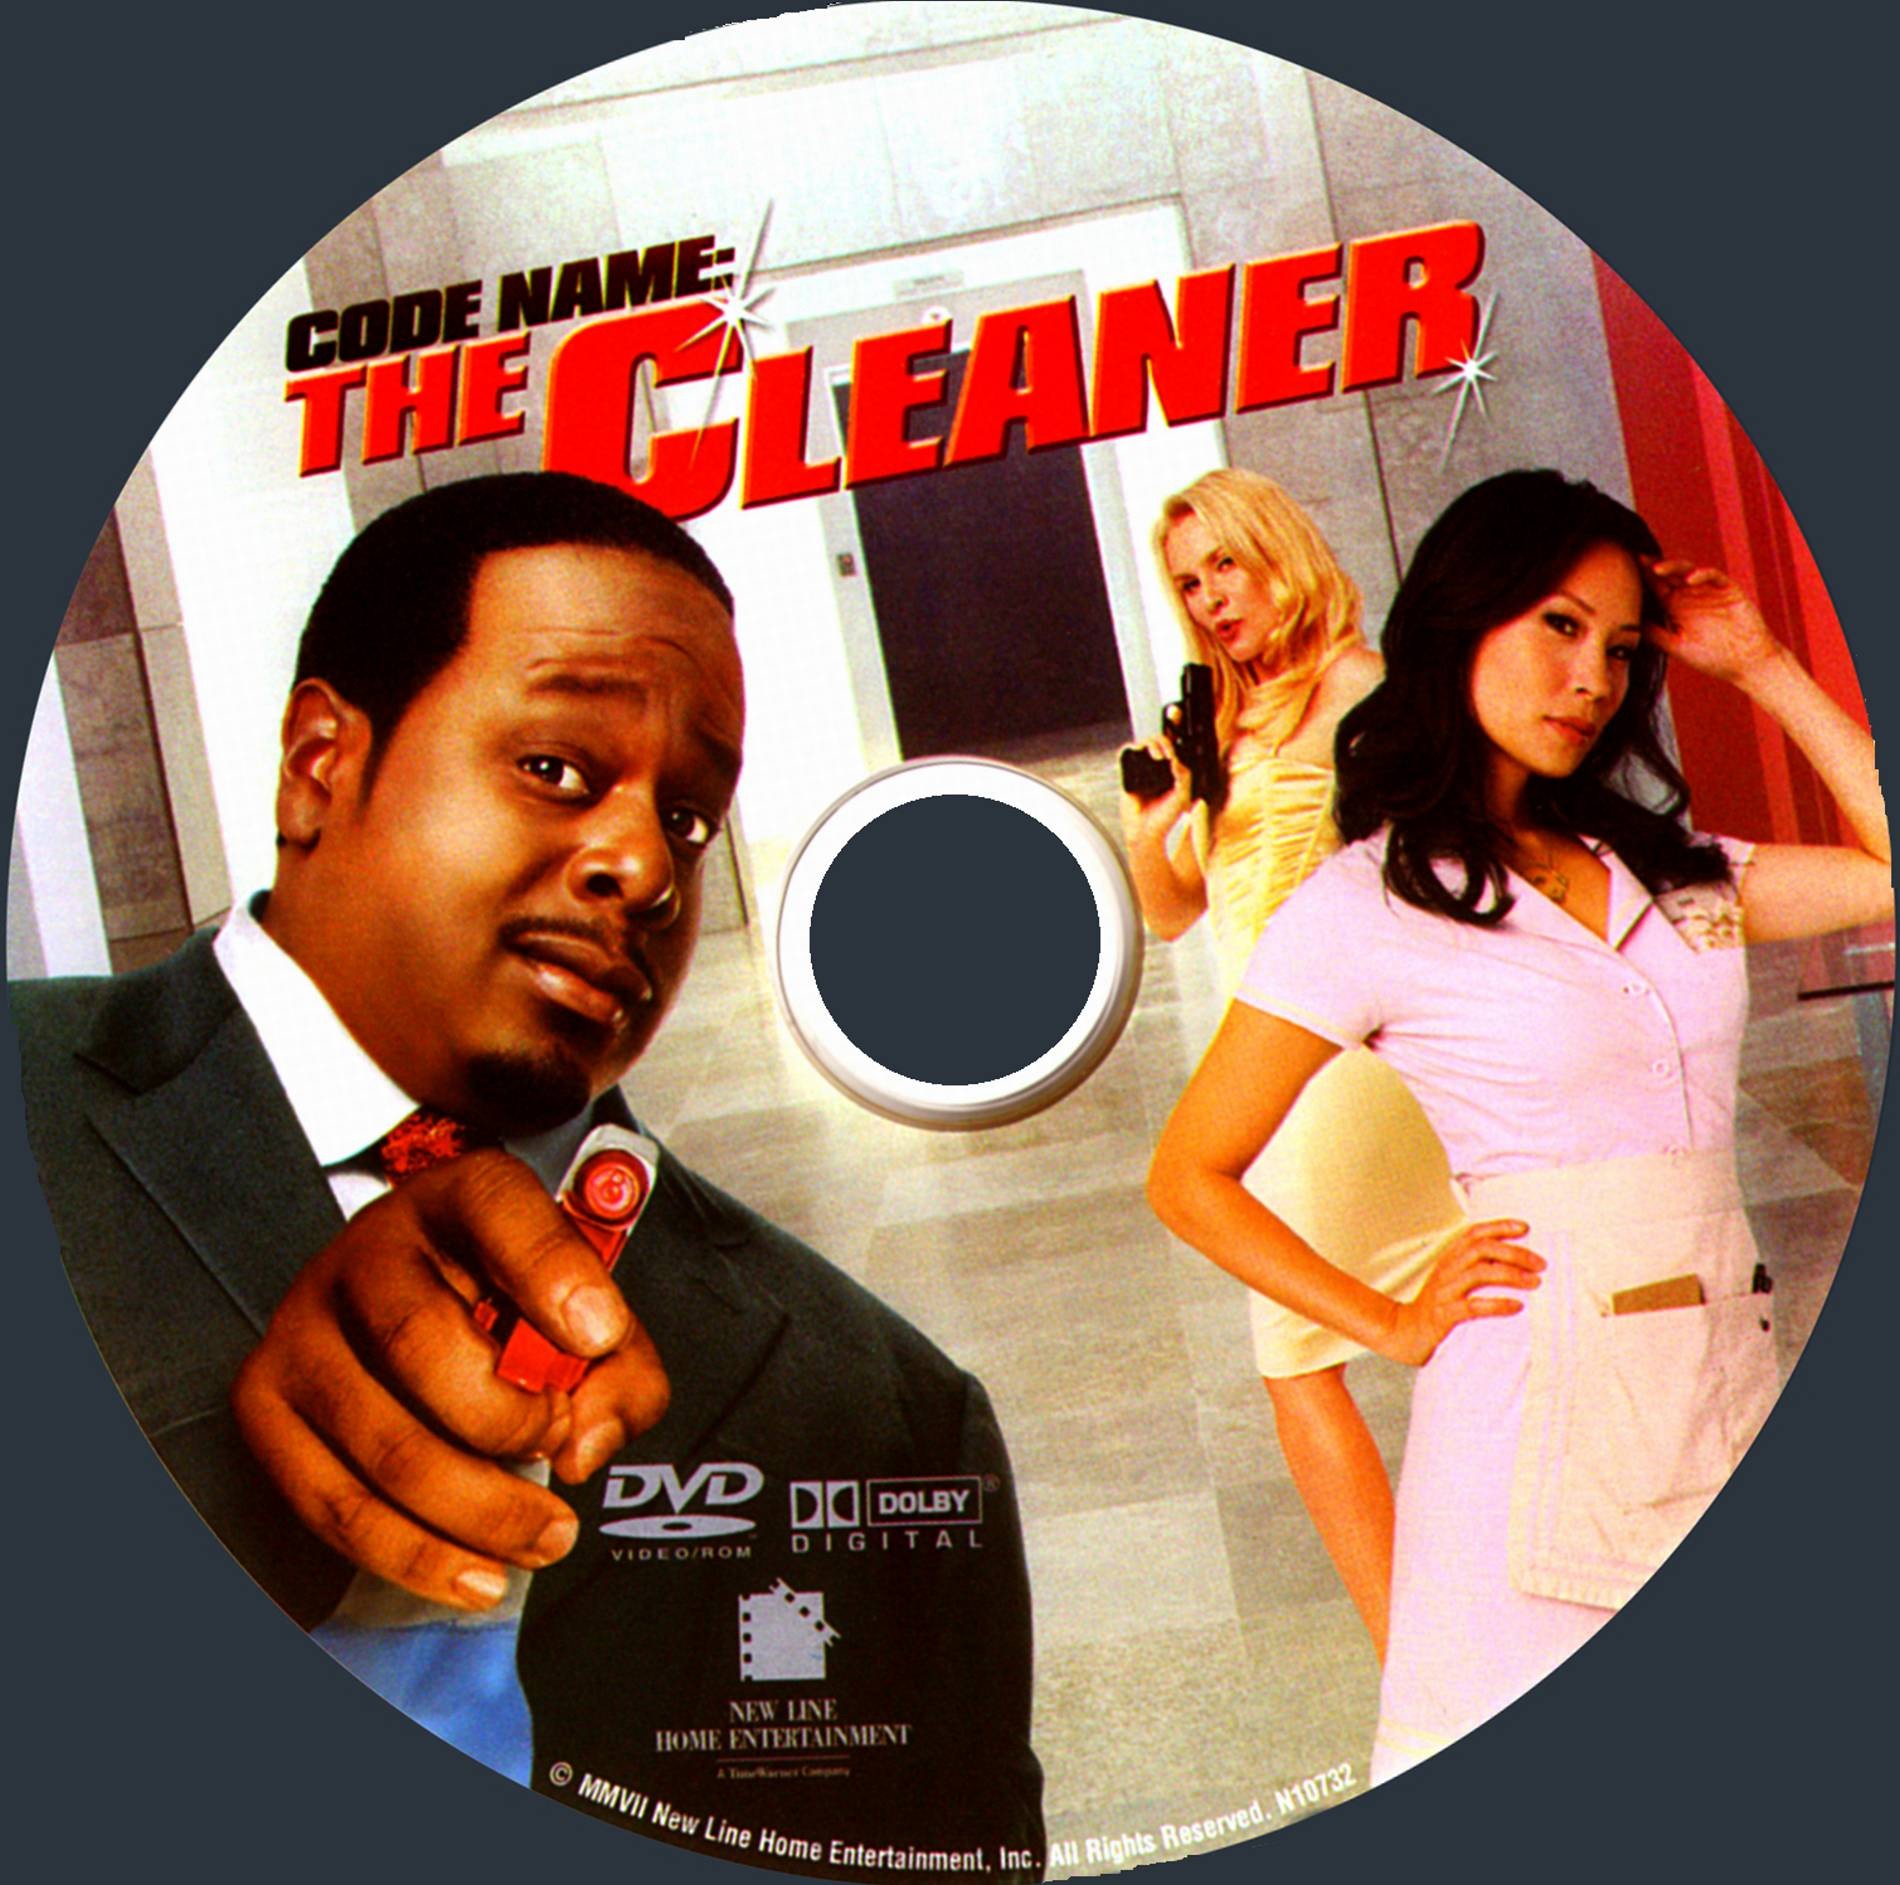 Code name the cleaner